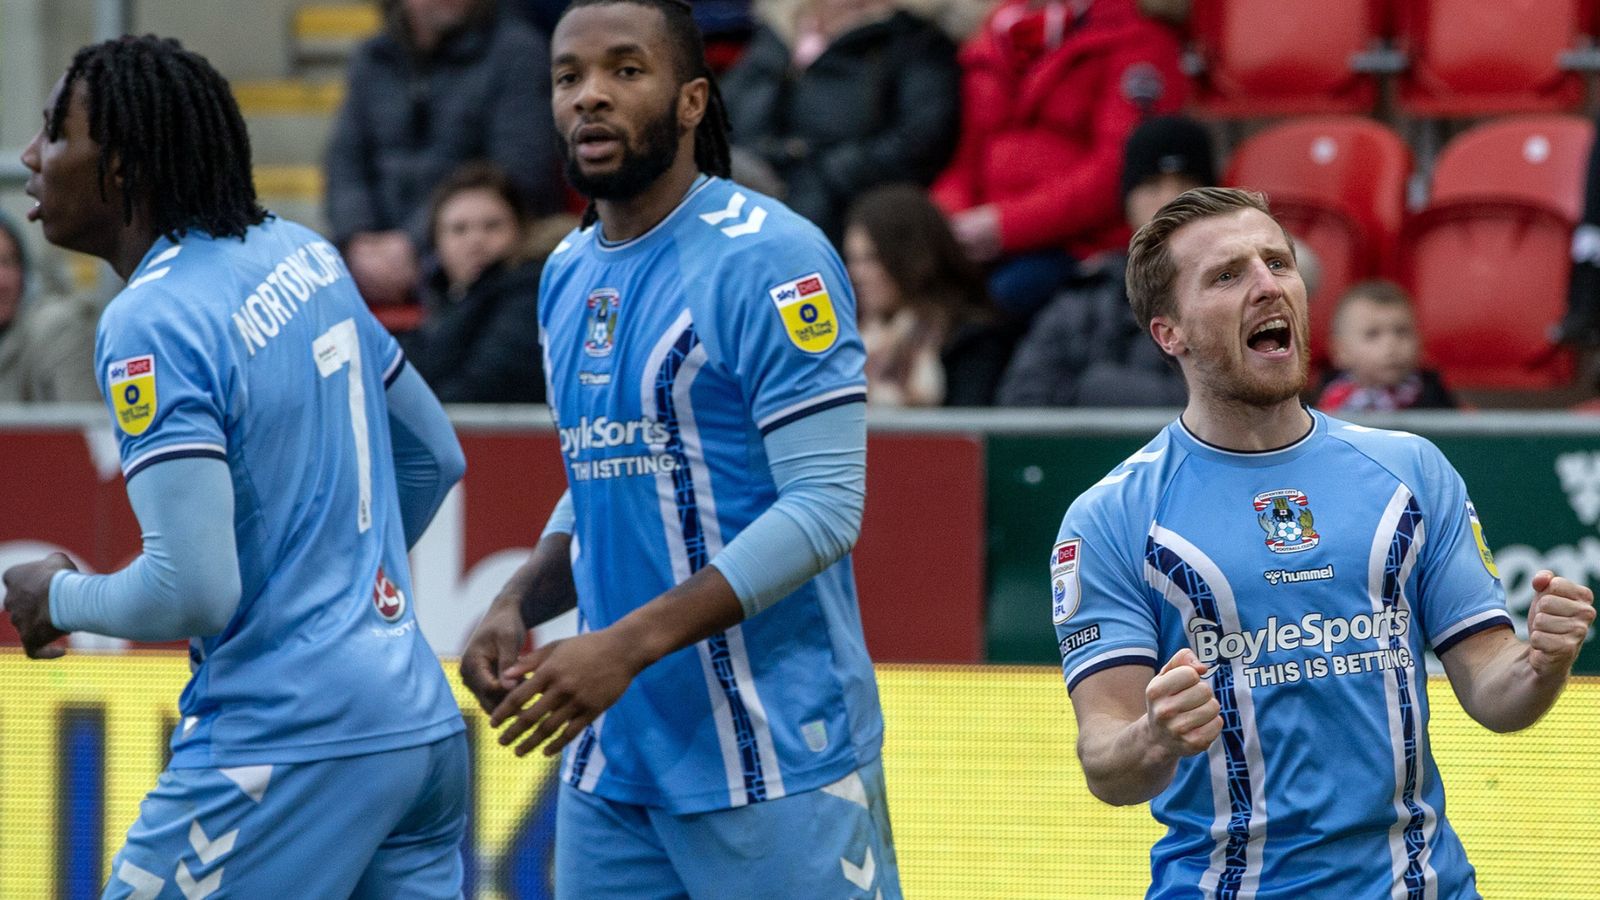 Watch Rotherham United vs Coventry City Live Stream, How To Watch Championship Round 13 Live TV Info Worldwide